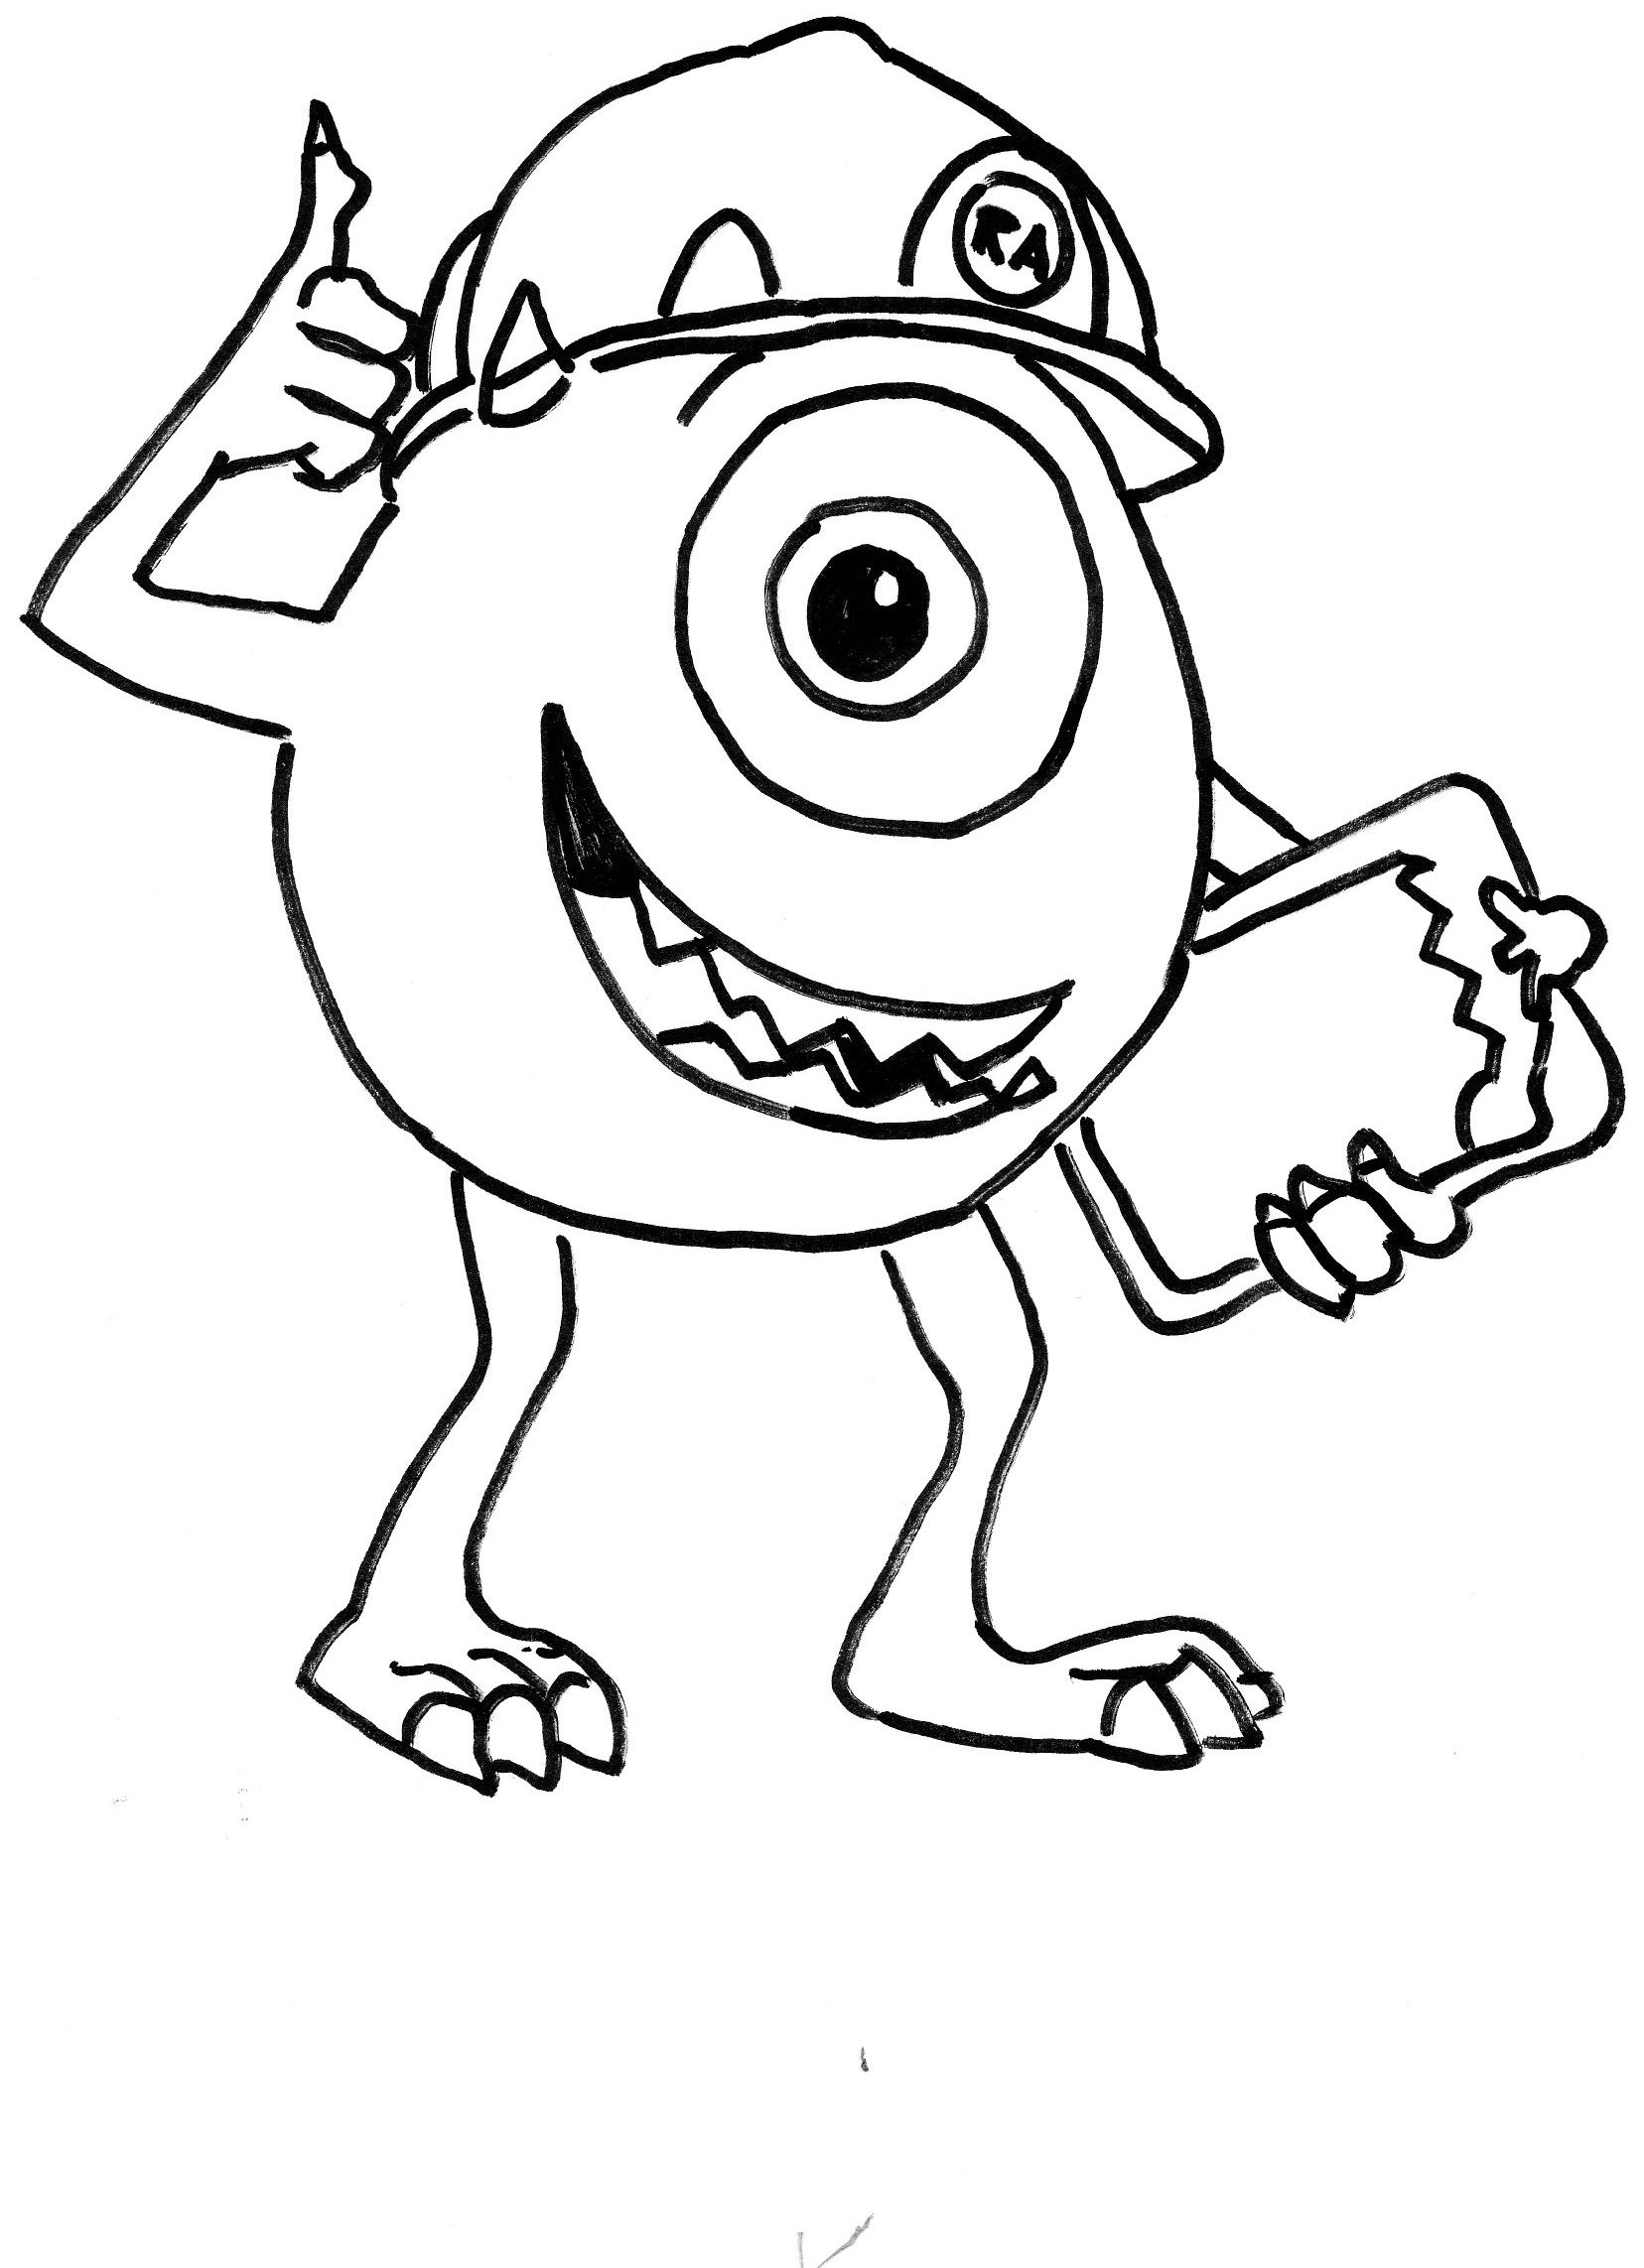 Coloring Sheets For Boys Printable
 Coloring Pages for Boys 2018 Dr Odd